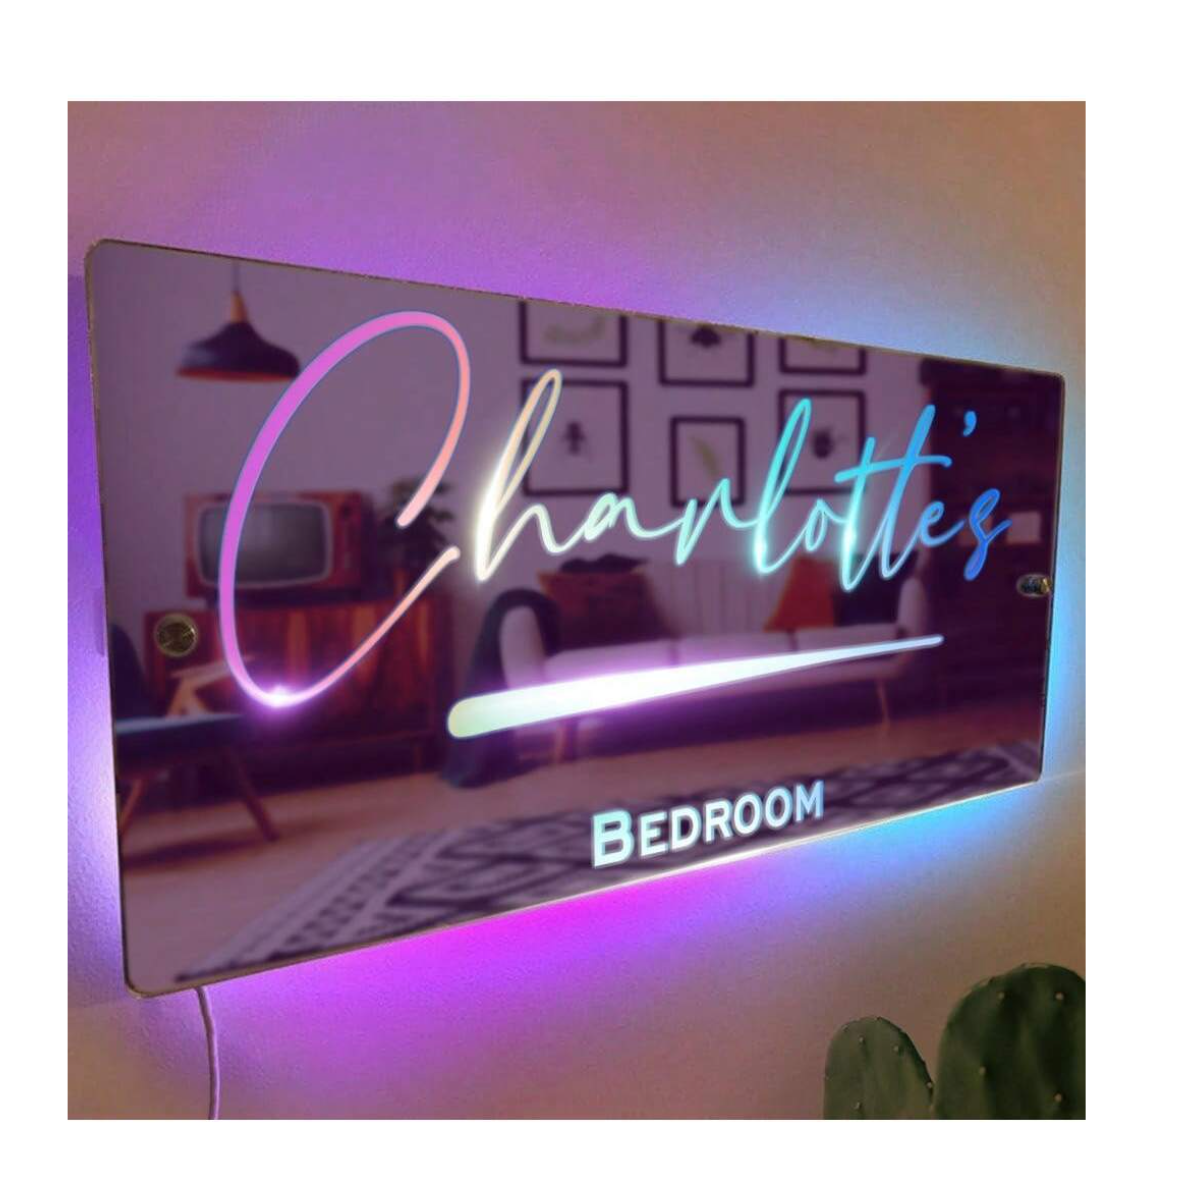 Luminous Elegance: Personalized Name LED Light Mirror - Modern Wall Decor Night Lamp for a Tailored Touch in Bedrooms and Living Rooms! 🌟✨ #CustomizedLightMagic